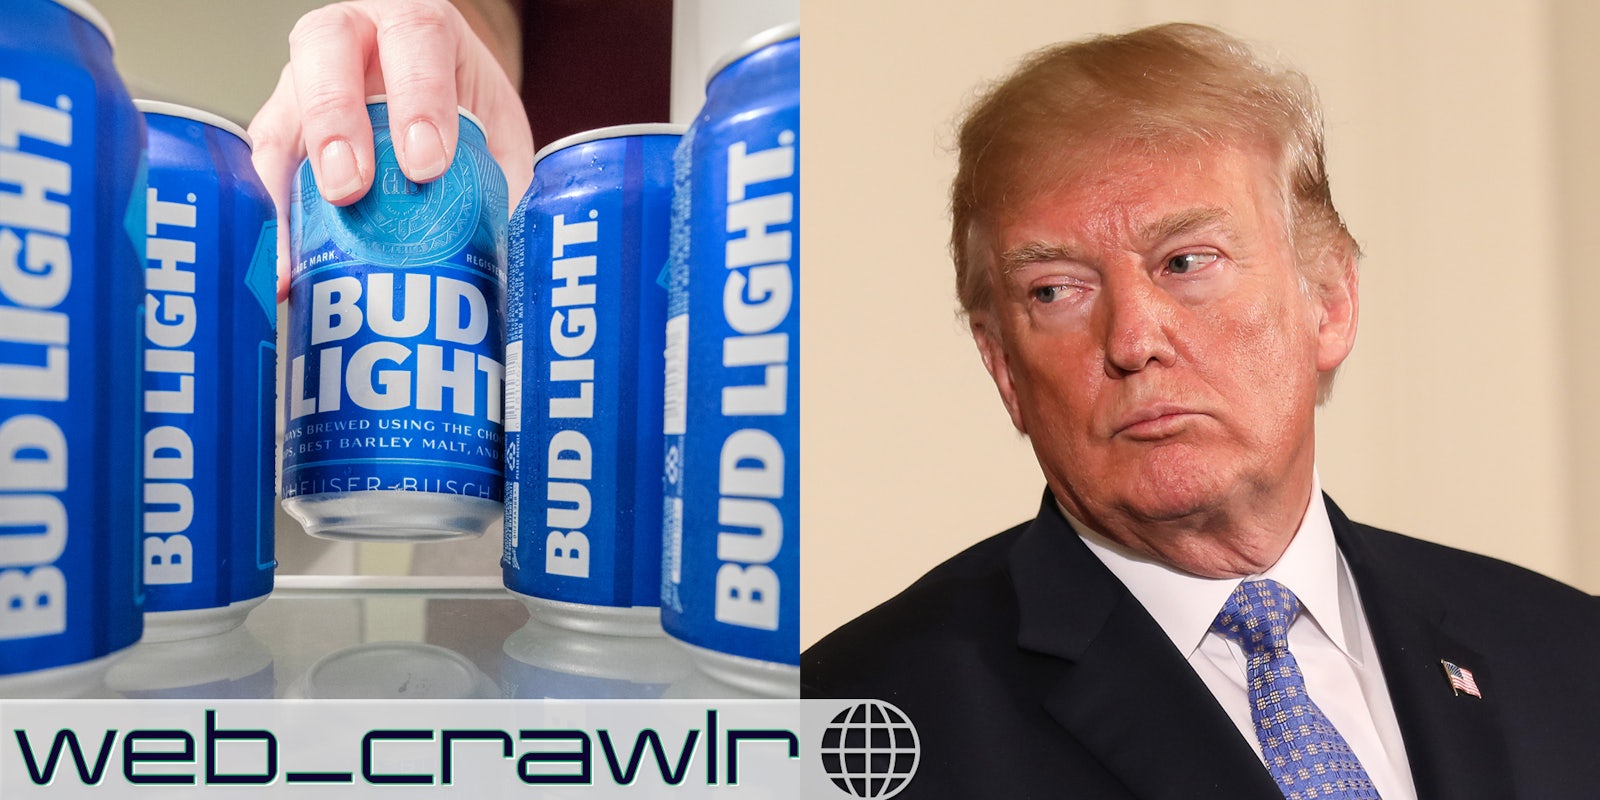 A person picking up a Bud Light next to Donald Trump staring at it. The Daily Dot newsletter web_crawlr logo is in the bottom left corner.